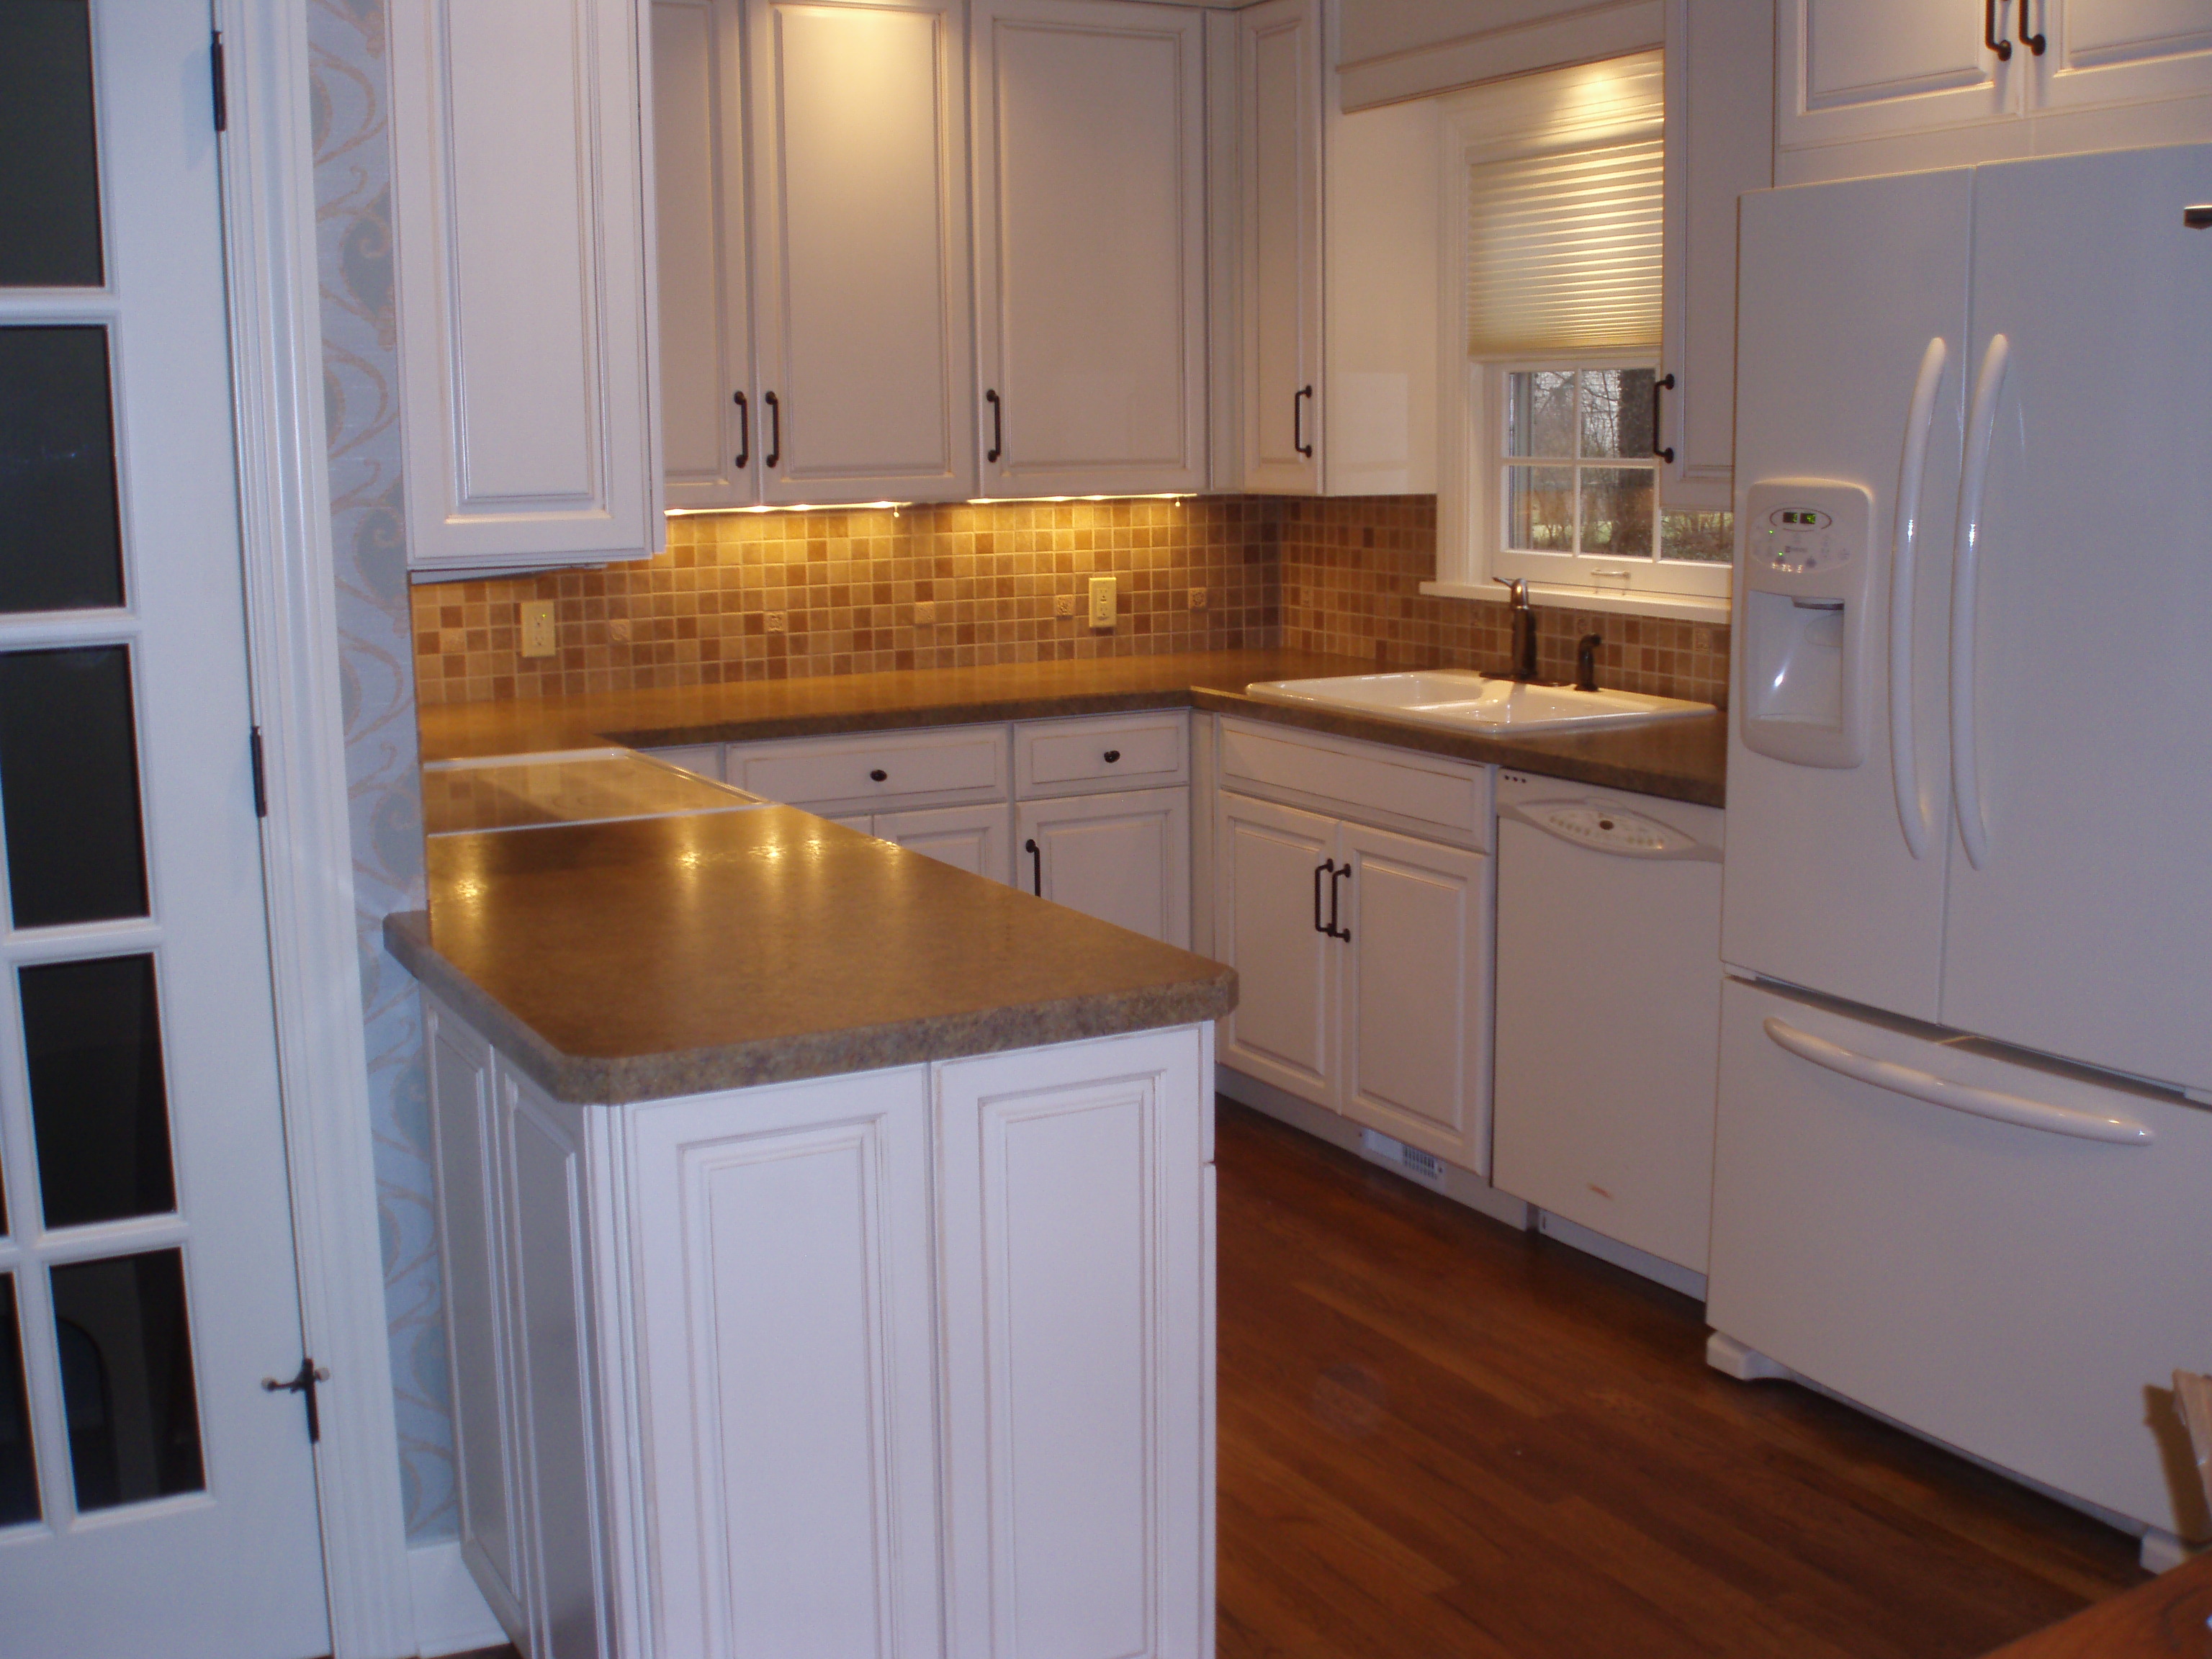 Complete Kitchen Remodel Using Diamond Brand Cabinets And Laminate